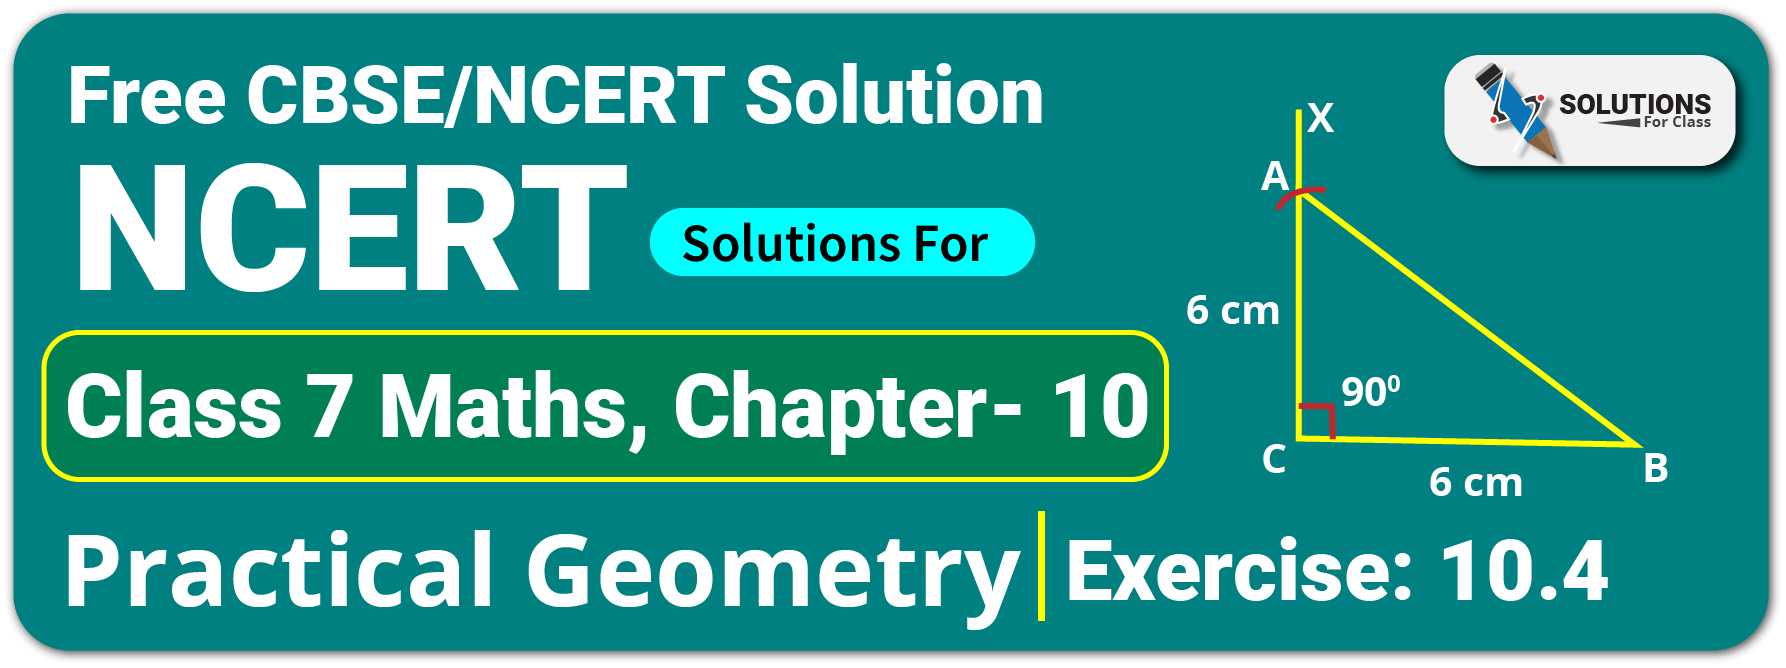 NCERT Solutions For Class 7 Maths Chapter 10 Practical Geometry Exercise 10.4